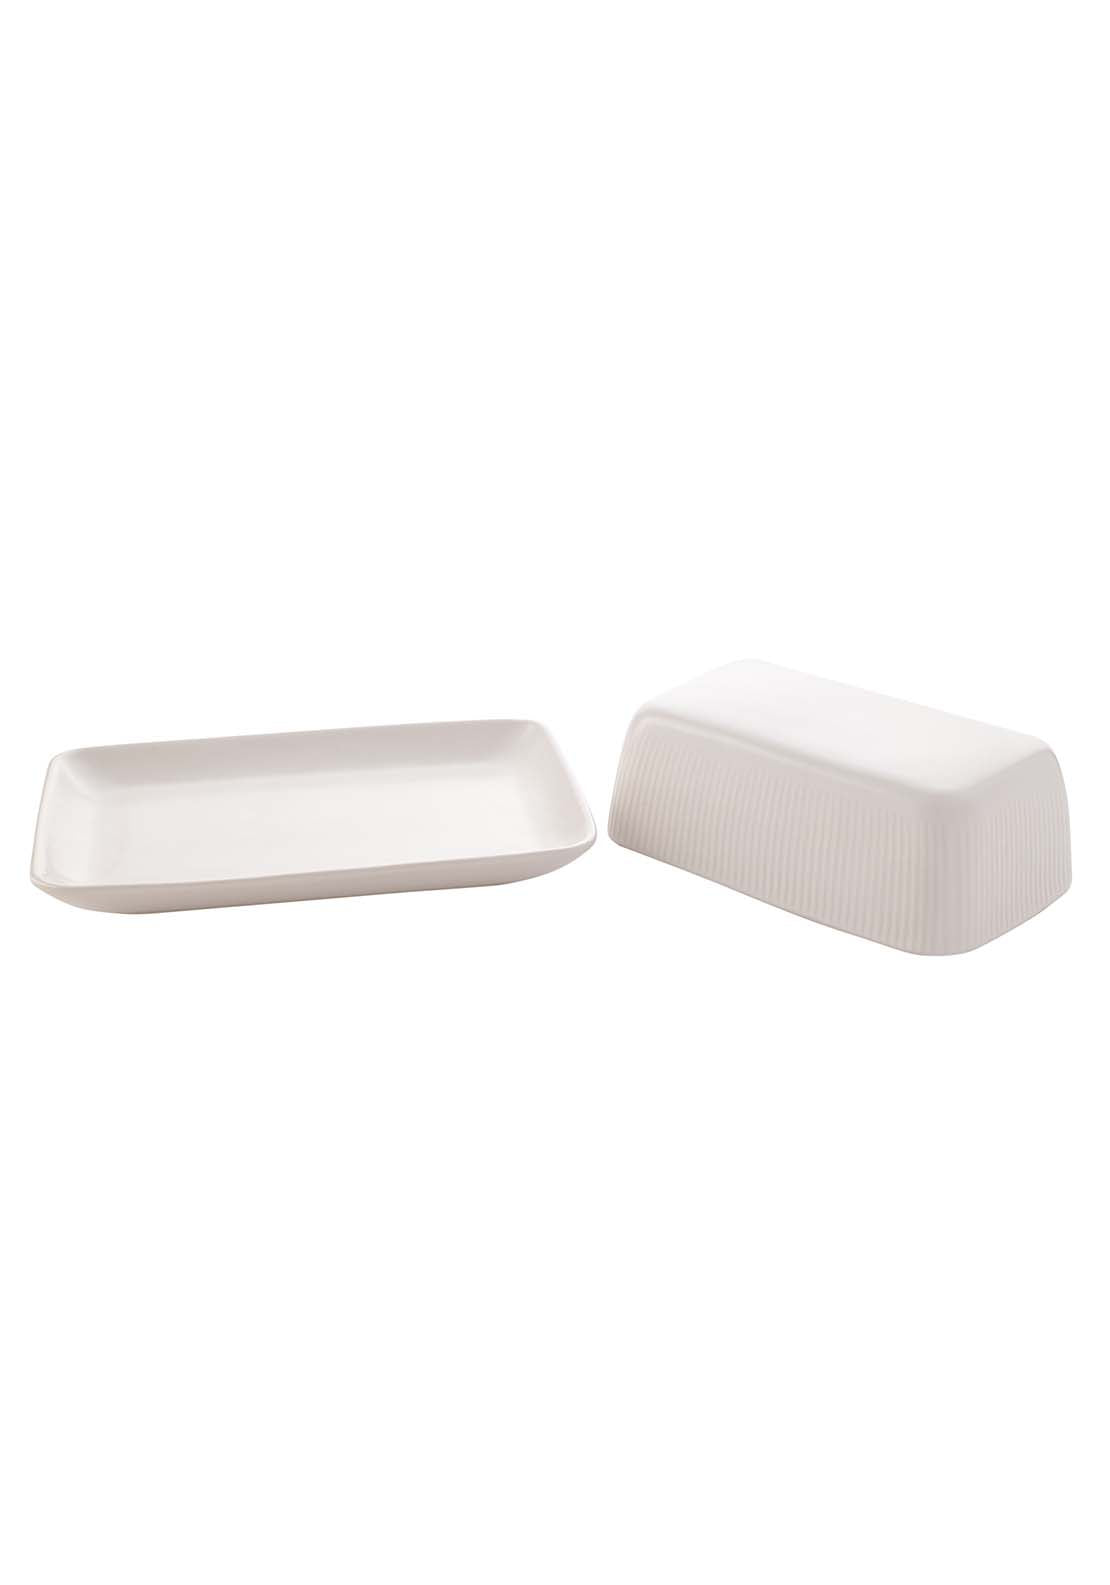 The Home Collection Ribbed Butter Dish - White 2 Shaws Department Stores